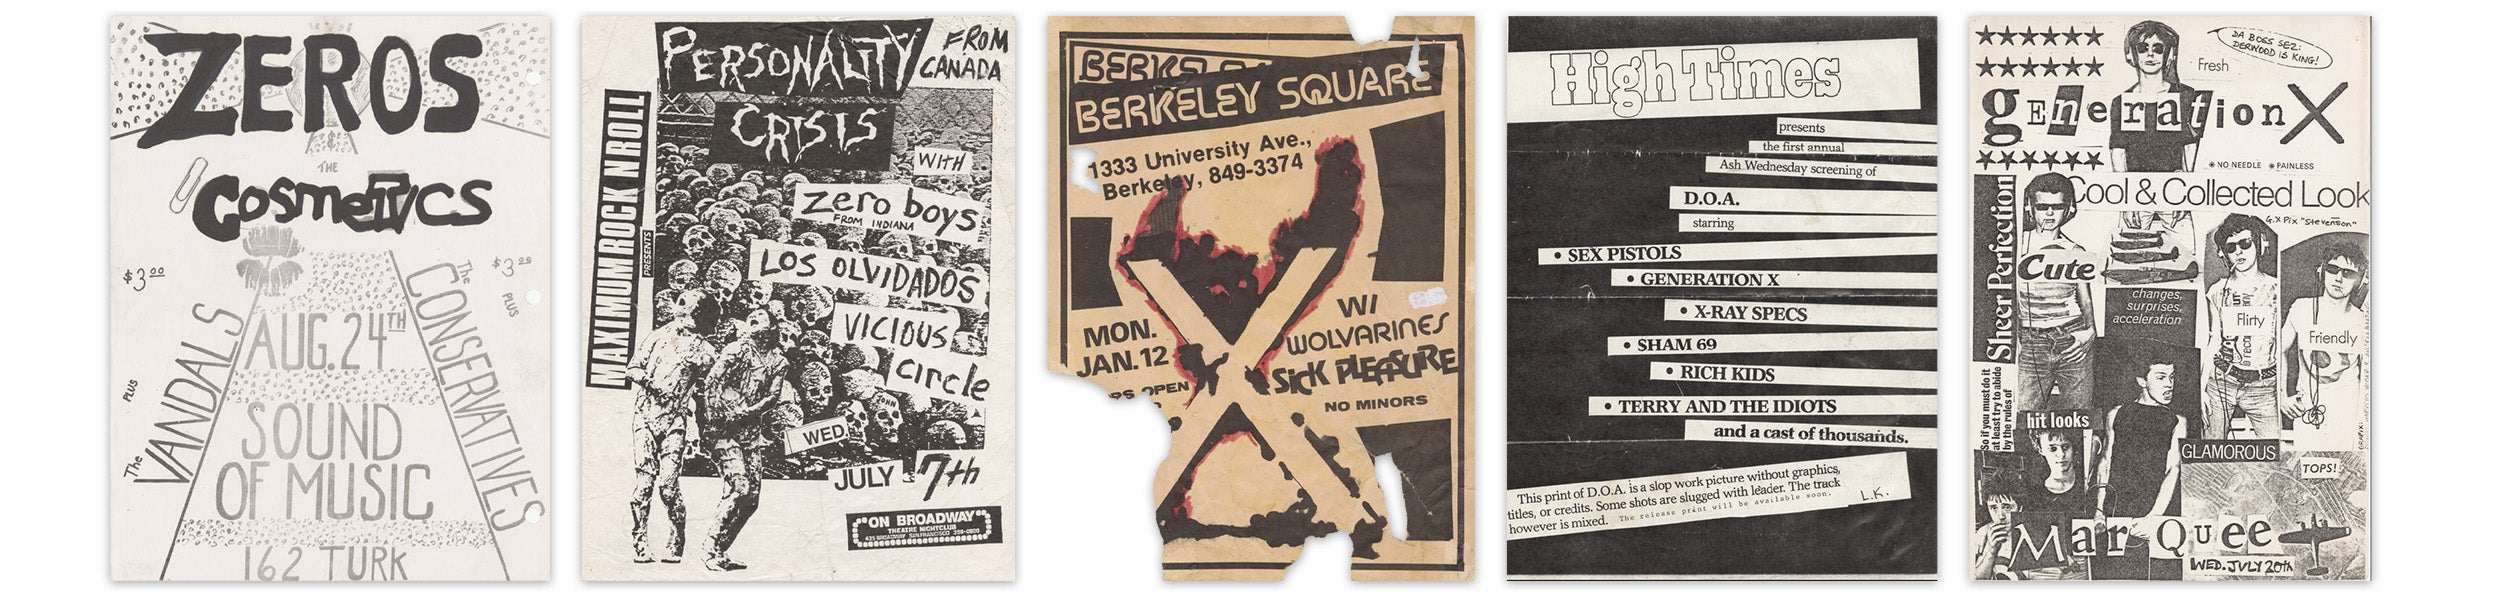 From left to right: A flyer of the handwritten style, promoting the Zeros and others at San Francisco’s Sound of Music venue, which operated from 1980-1987; A flyer for a 1982 gig featuring the Zero Boys (Indianapolis) at San Francisco’s On Broadway Theater; The burning logo of the Los Angeles band X is featured on this poster for a 1981 Berkeley gig; A flyer for a 1980 screening of the punk documentary D.O.A, featuring a double dose of “X” bands: Generation X and X-Ray Specs (sic – the band actually spelled it “Spex” for added effect); Ransom note lettering, handwritten additions, magazine headlines, and newspaper imagery – all core elements of the graphic style of punk – grace a flyer for a 1977 Generation X show at London’s Marquee Club